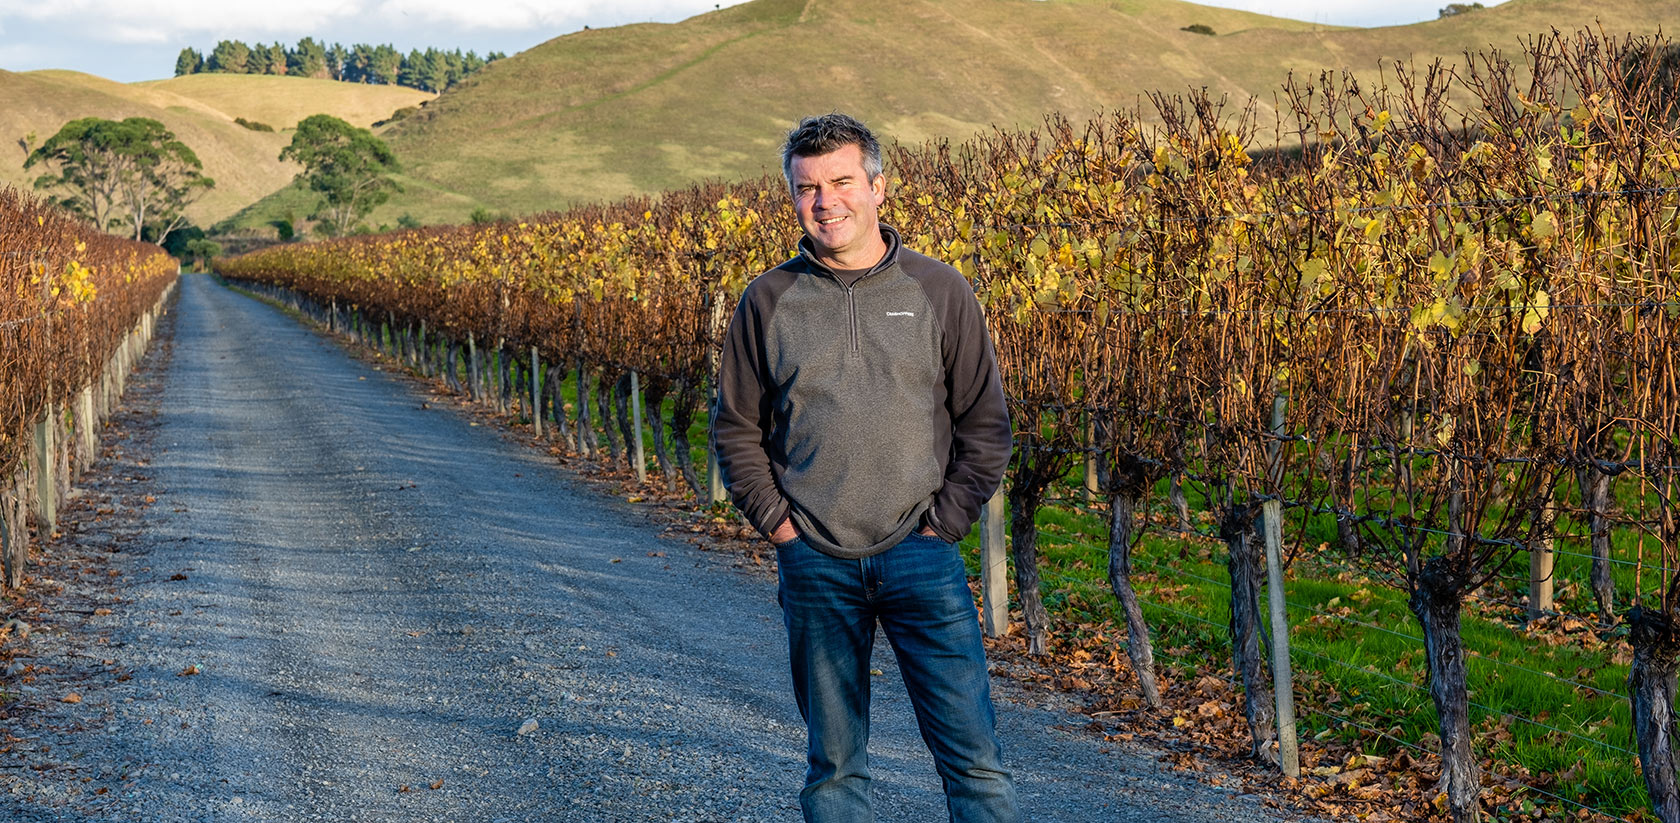 Contact Neal Cave at Alchemy Wines